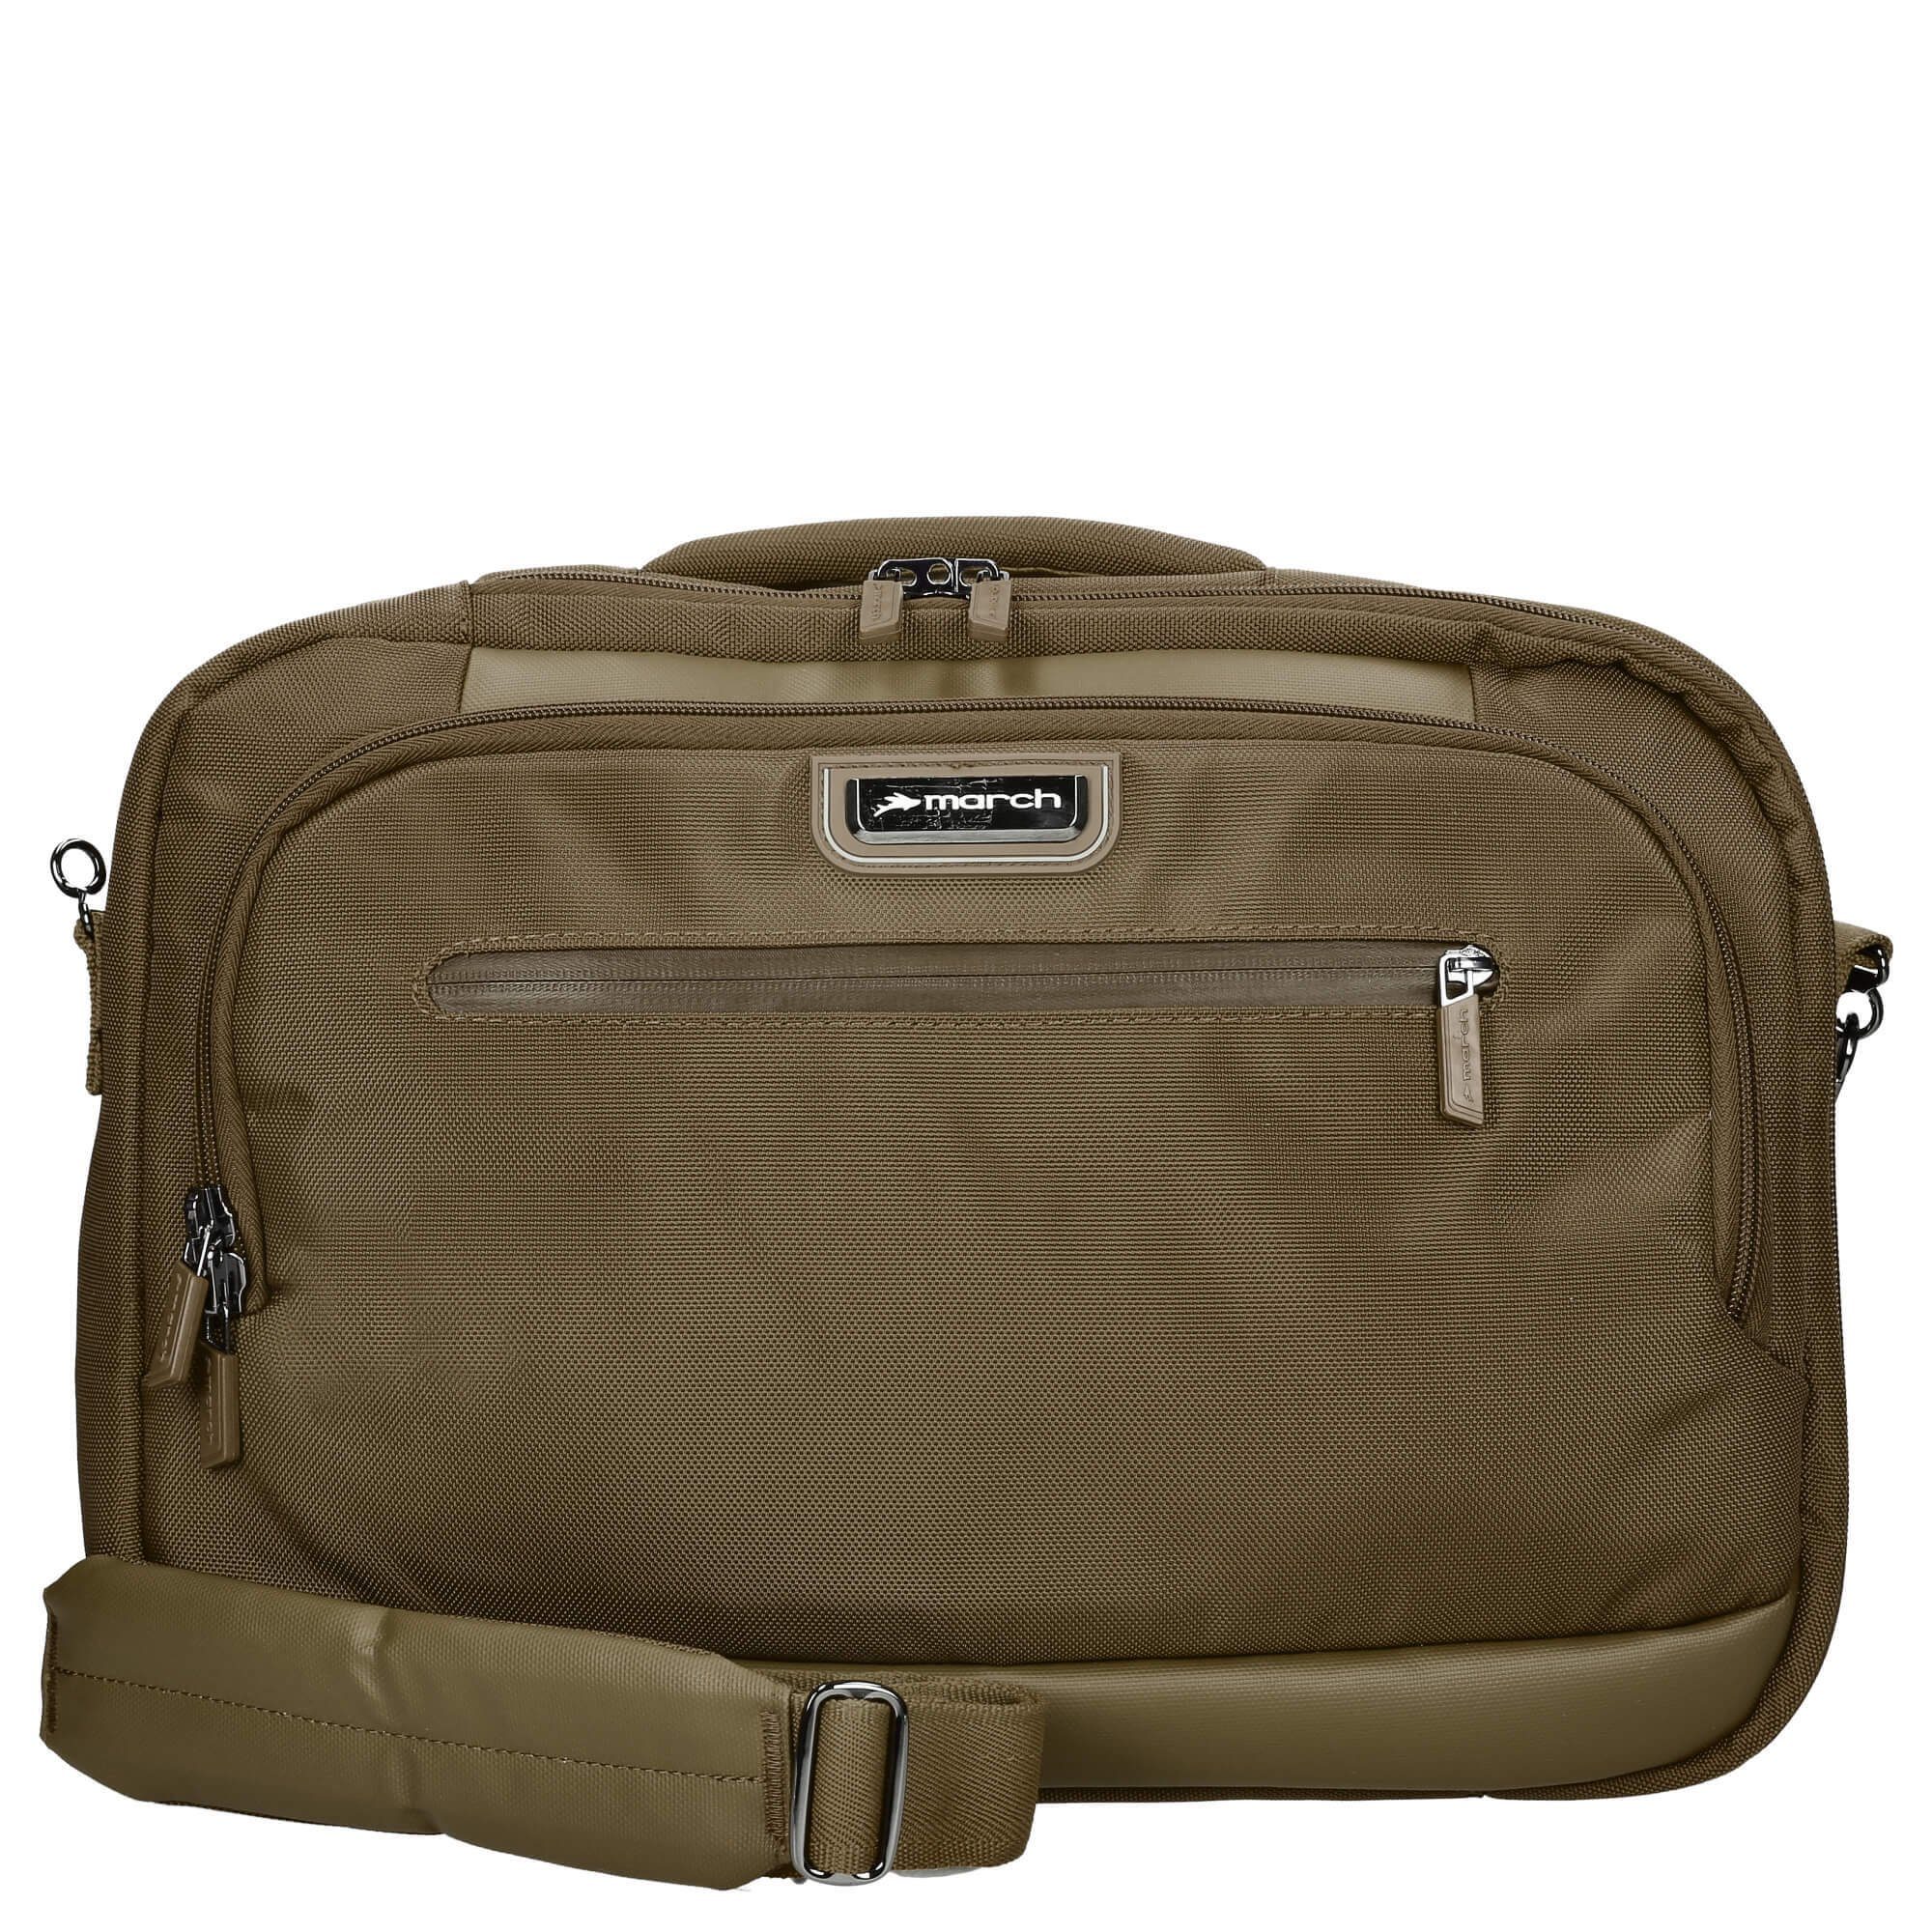 March15 Trading Businesstasche Bags take Rolling Laptoptasche Away bronze - cm 42